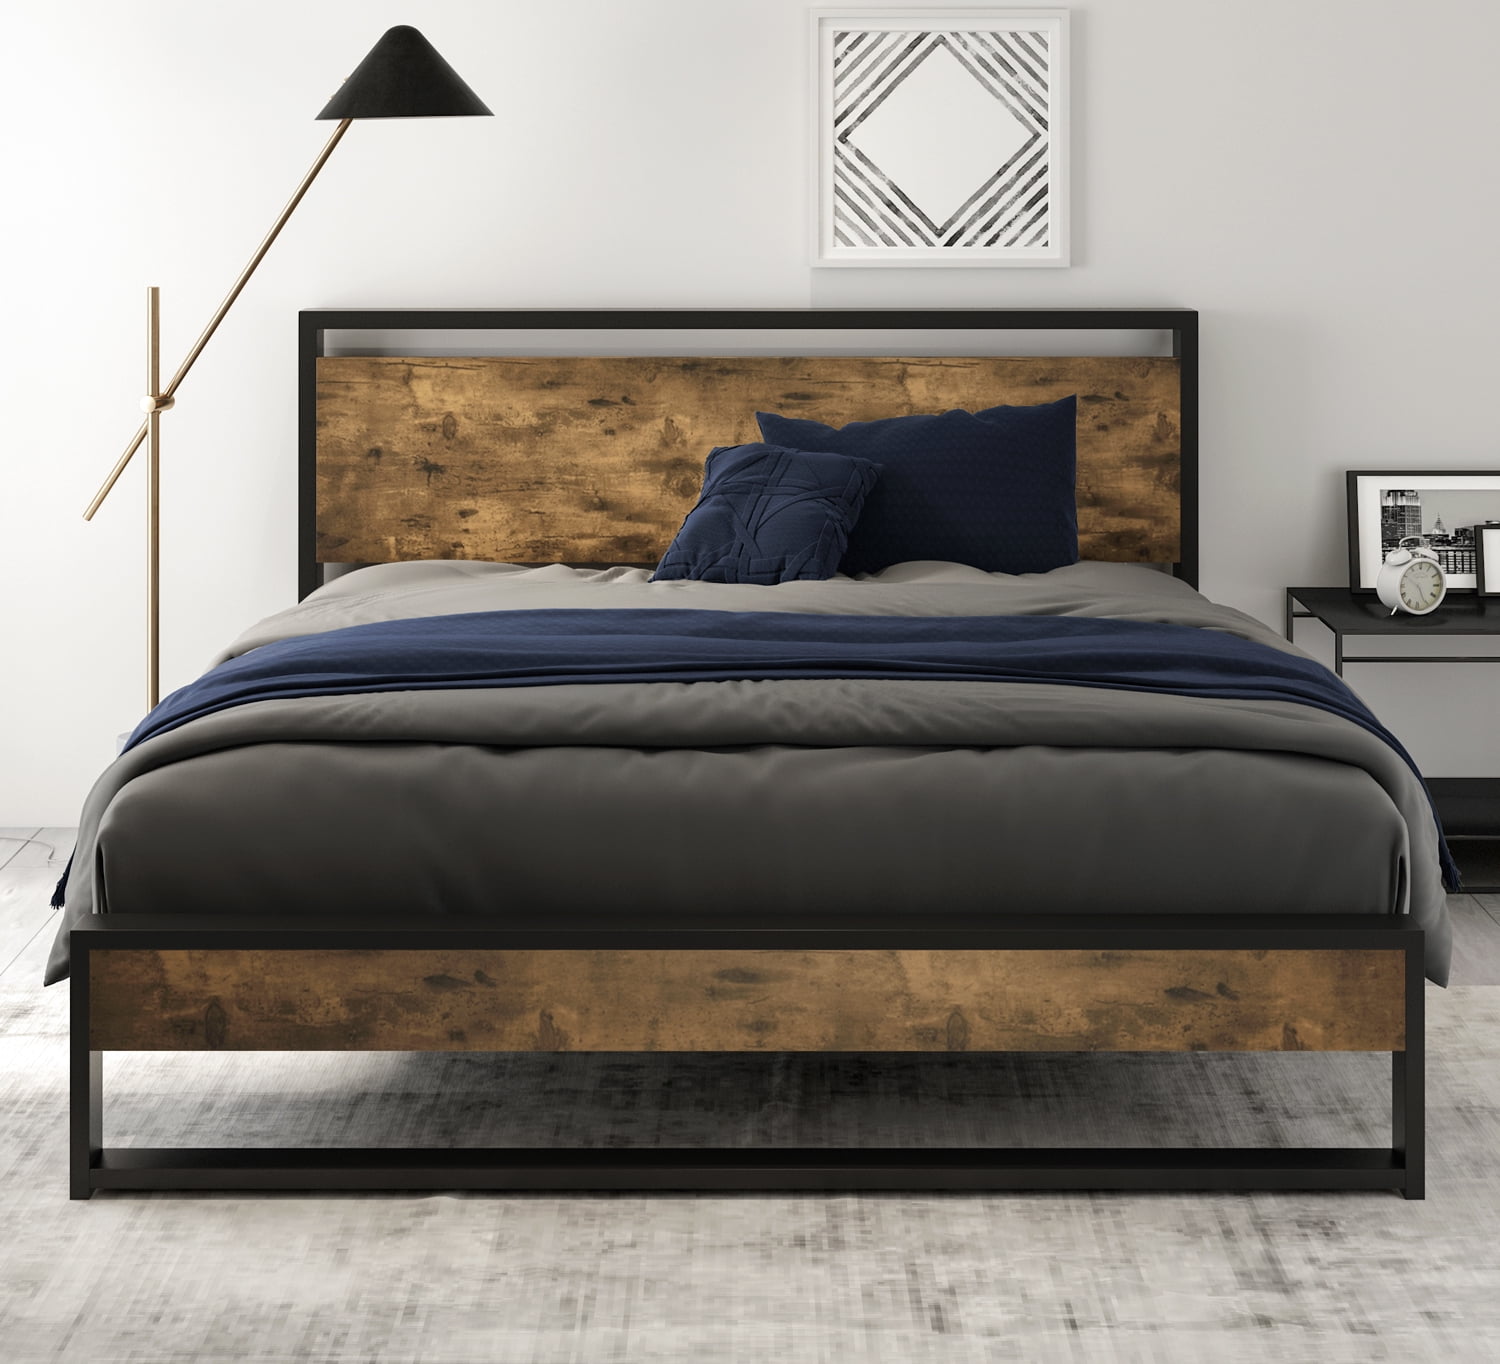 Allewie Brown Twin Bed Frame With, Allewie Twin Size Platform Bed Frame With Wood Headboard And Metal Slats